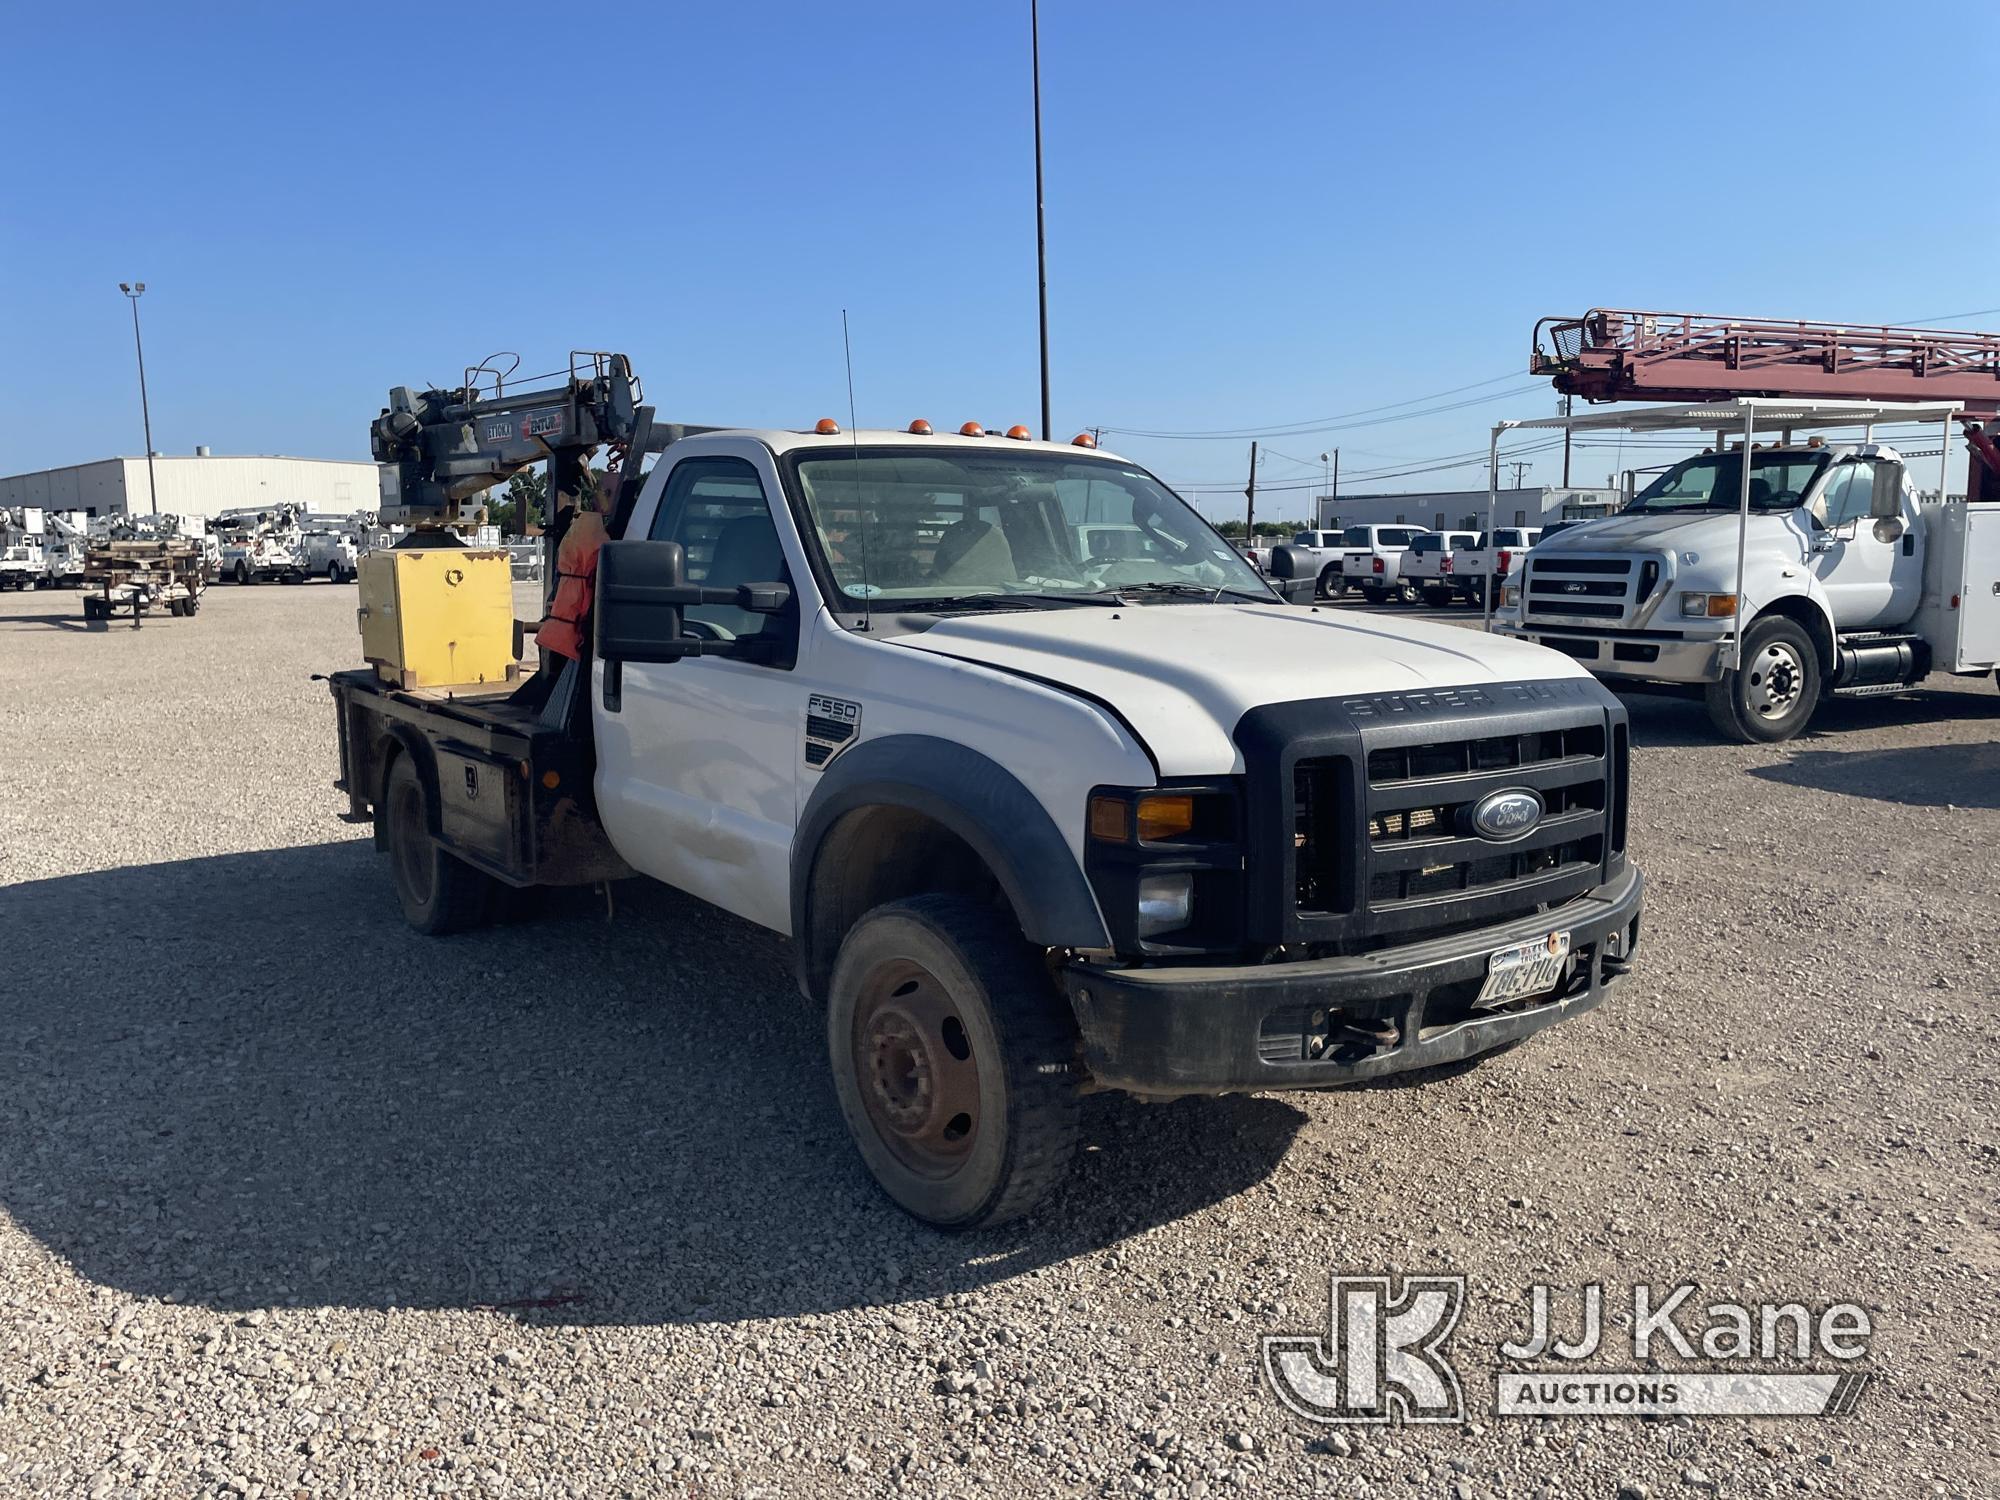 (Waxahachie, TX) 2008 Ford F550 Flatbed Truck Barely Runs & Moves, Crane Condition Unknown, Jump To